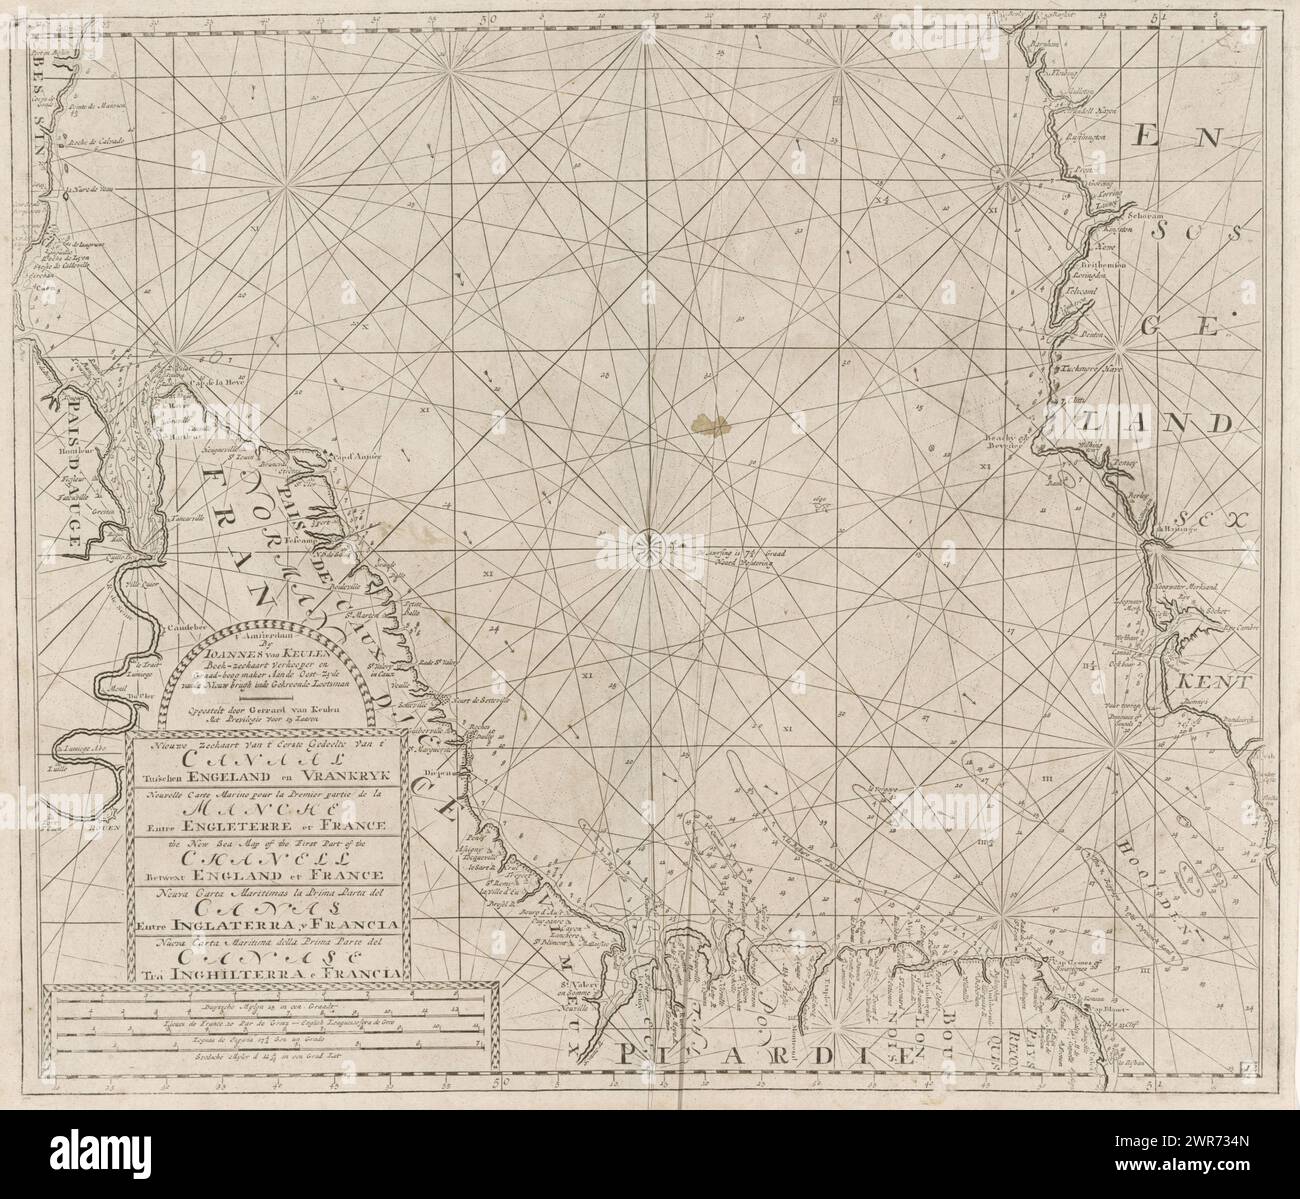 Passage map of the Channel between England and France, part 1, New Nautical Chart of the First Part of the Canal Between England and France (title on object), Passage map of a part of the Channel, the strait between Great Britain and France, with a compass rose. Bottom left a cartouche with the title, the address of the publisher and the scale., print maker: anonymous, after design by: Gerard van Keulen, publisher: Johannes van Keulen (I), Amsterdam, 1688 - 1803, paper, engraving, etching, height 528 mm × width 615 mm, print Stock Photo